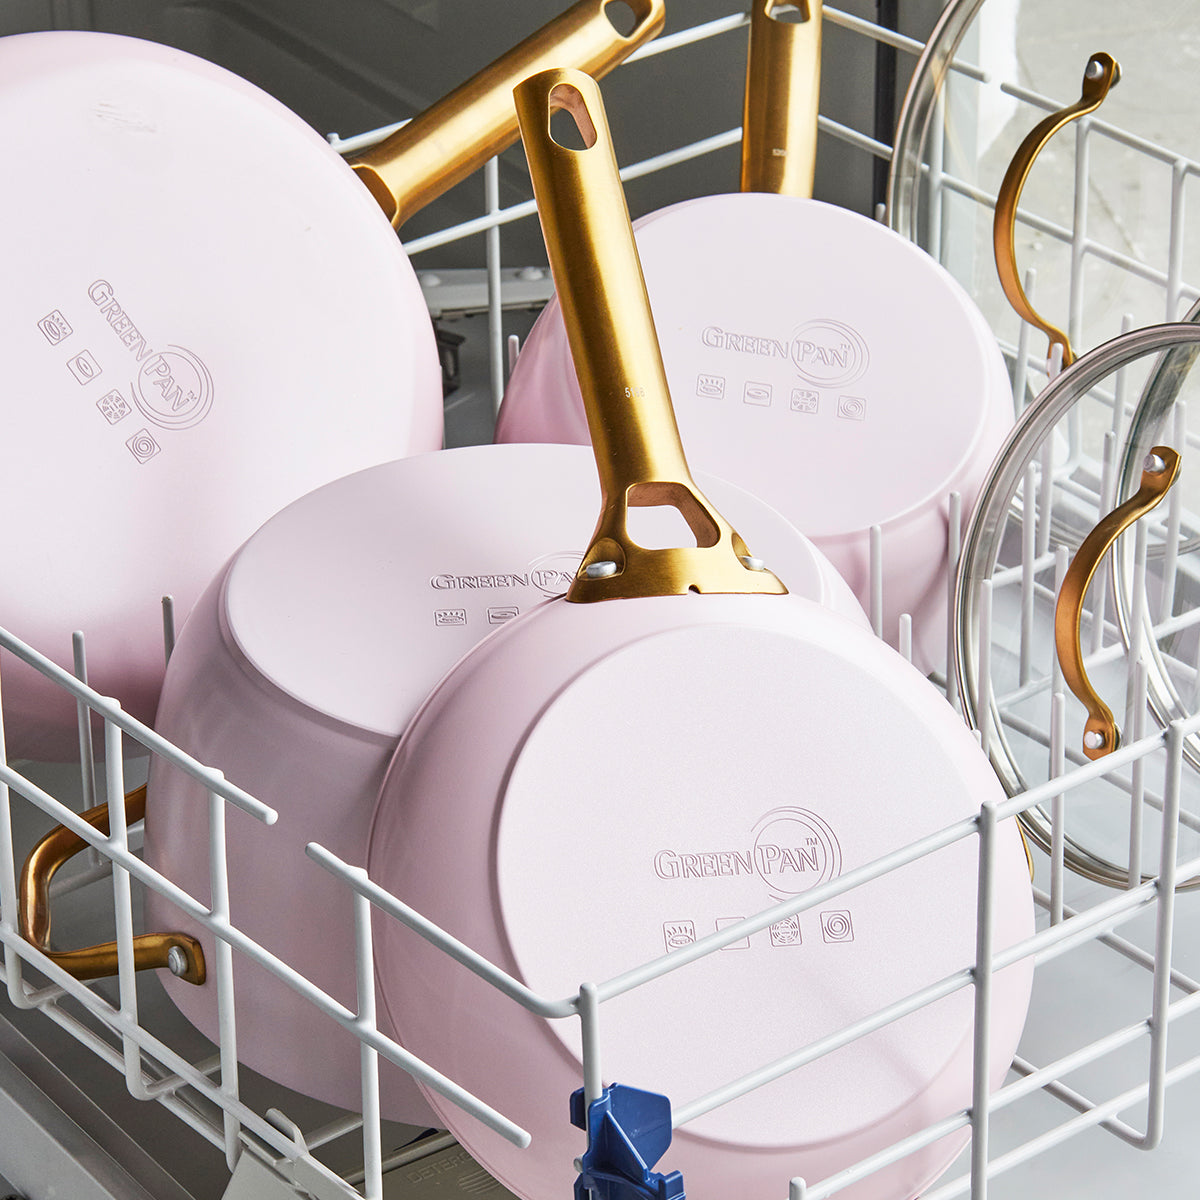 Blush with Gold-Tone Handles